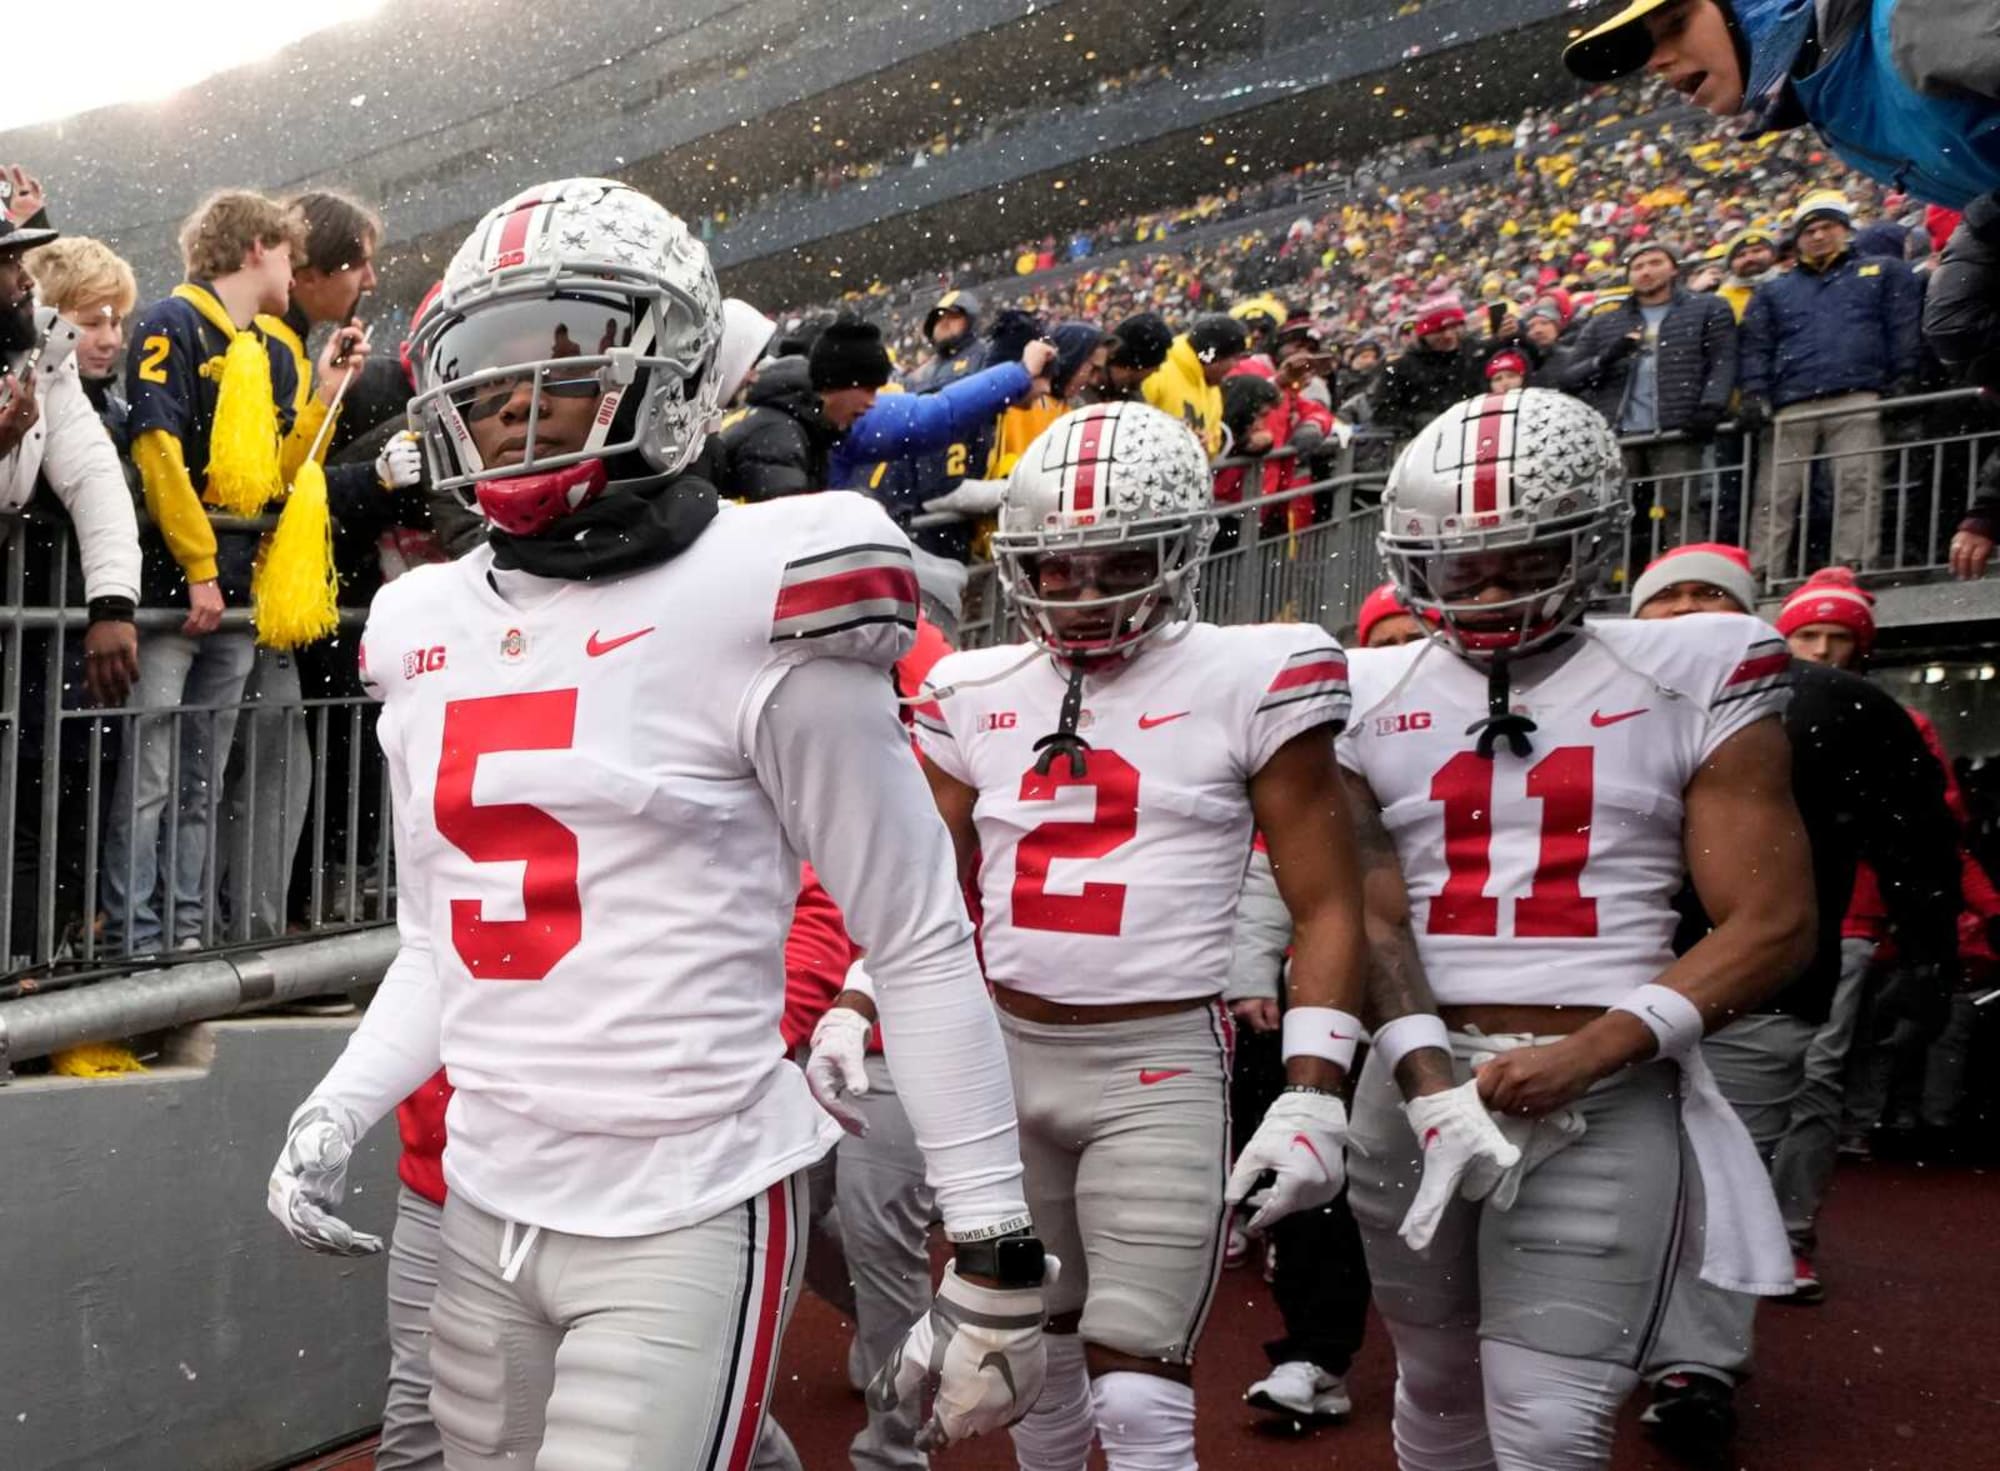 Ohio State Football How optouts will affect OSU in the Rose Bowl